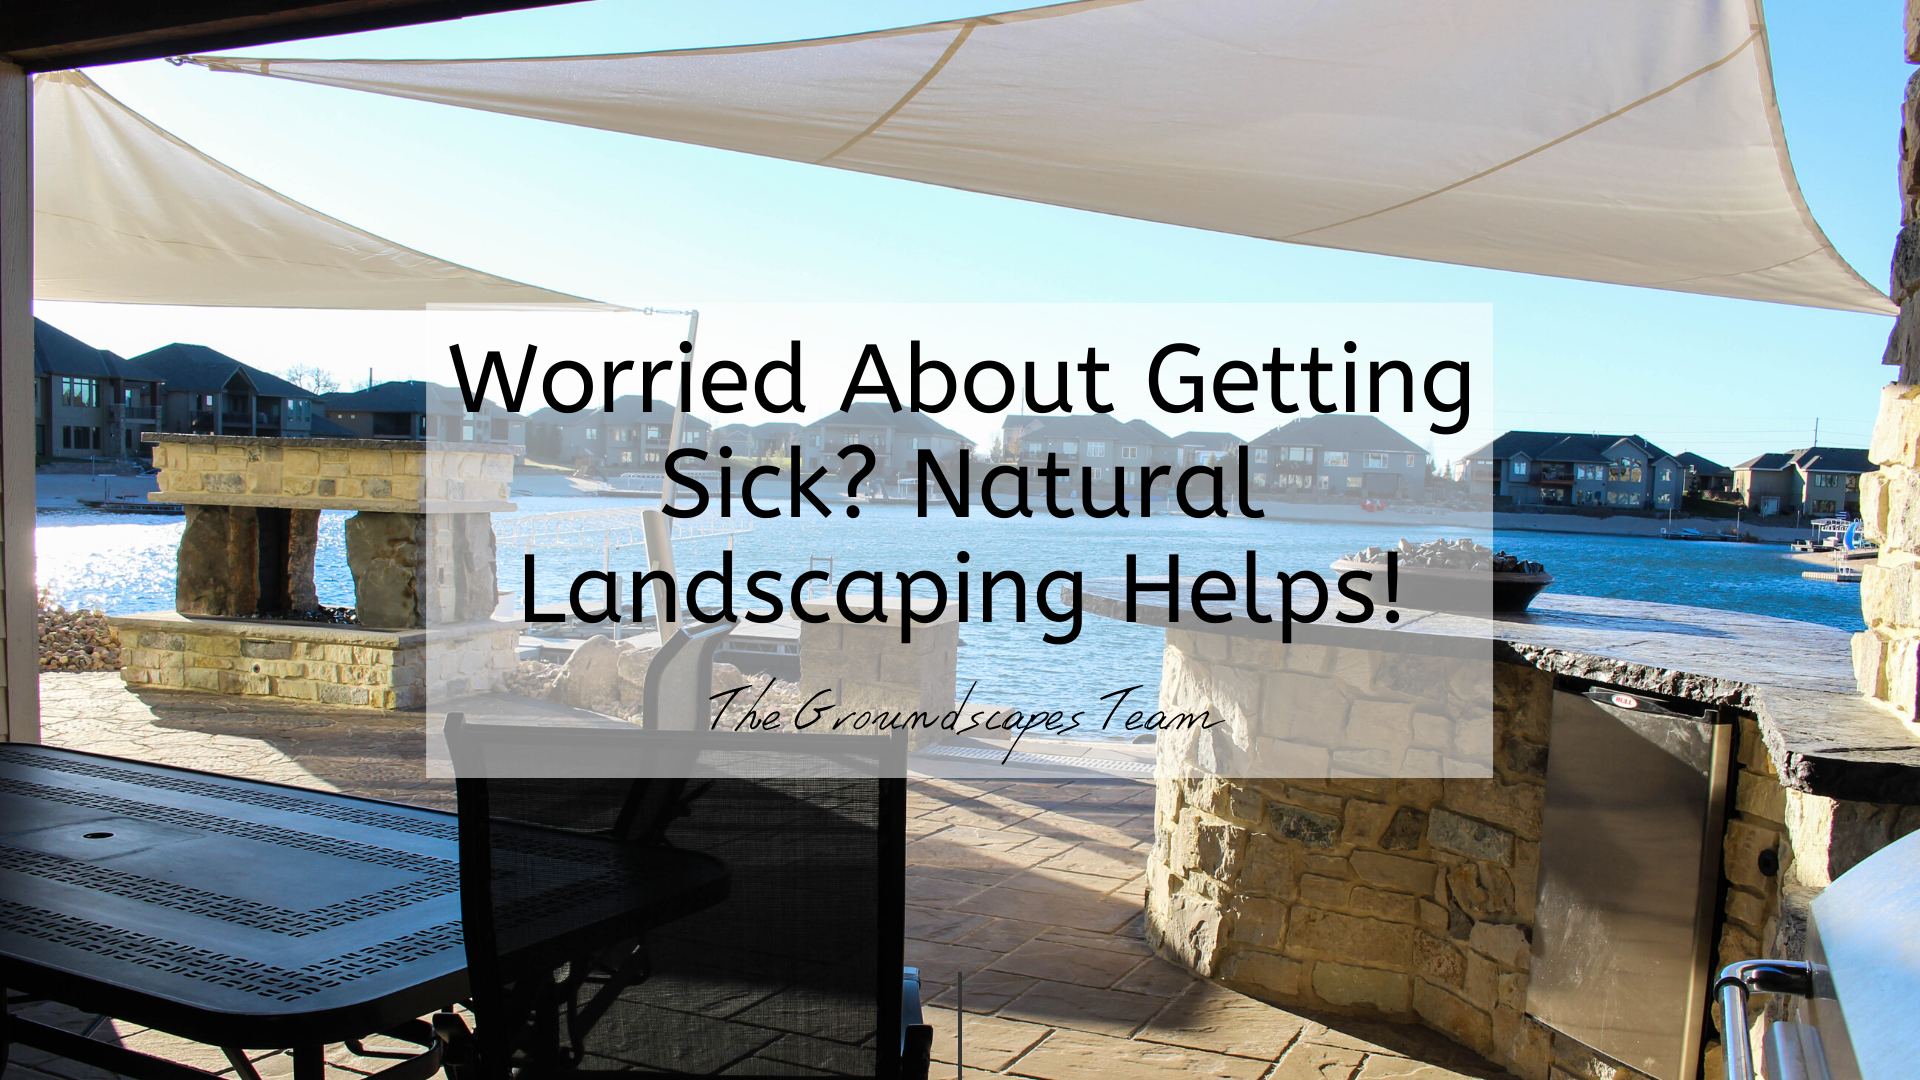 Worried About Getting Sick? Natural Landscaping Helps!